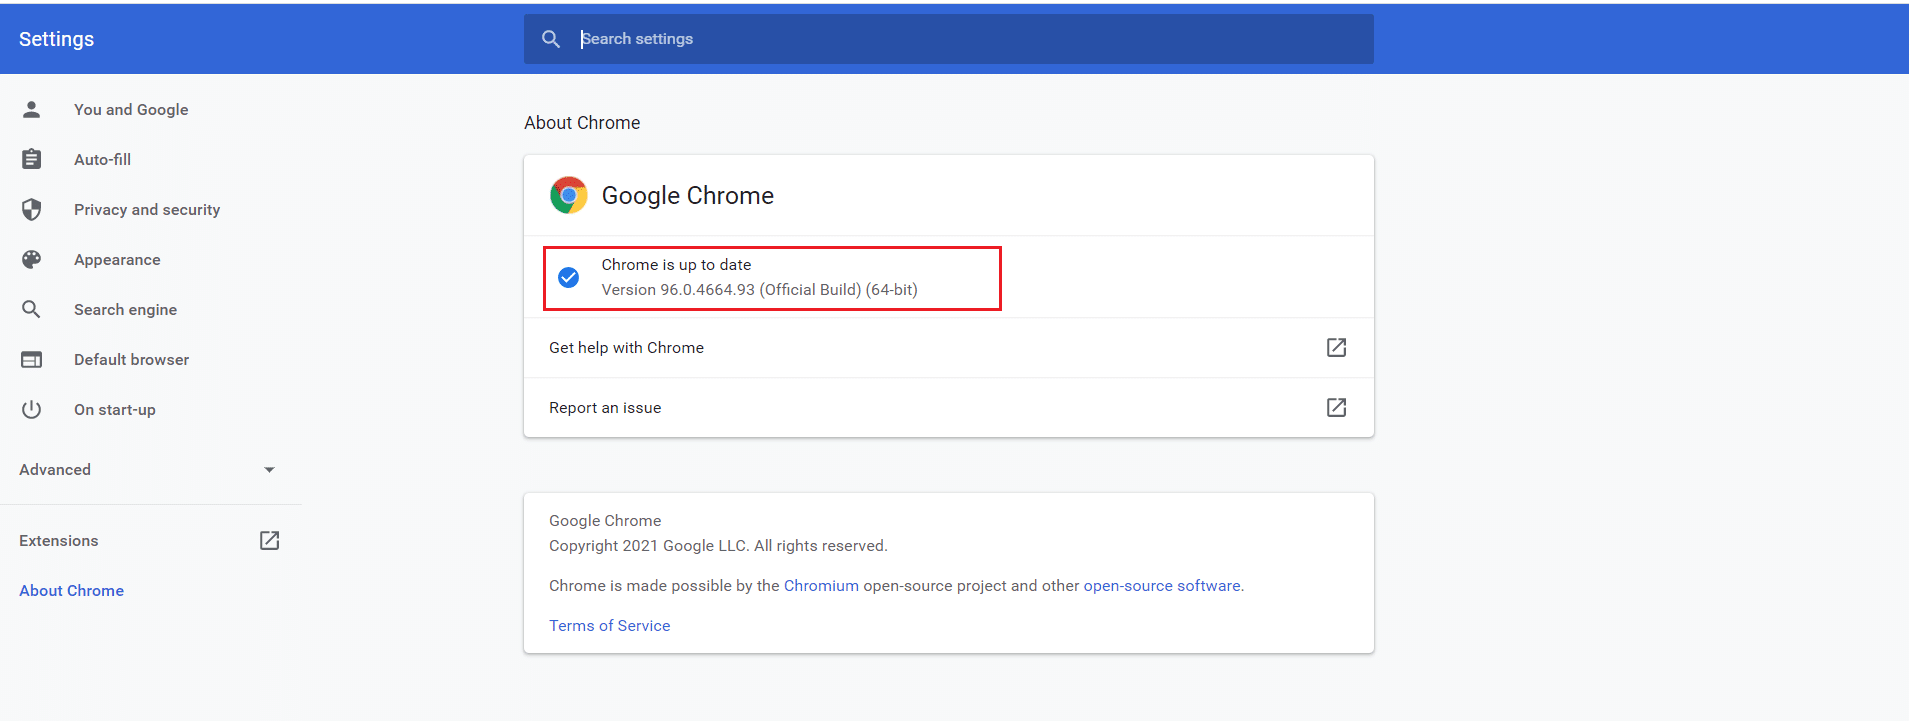 Chrome is up to date Dec 2021